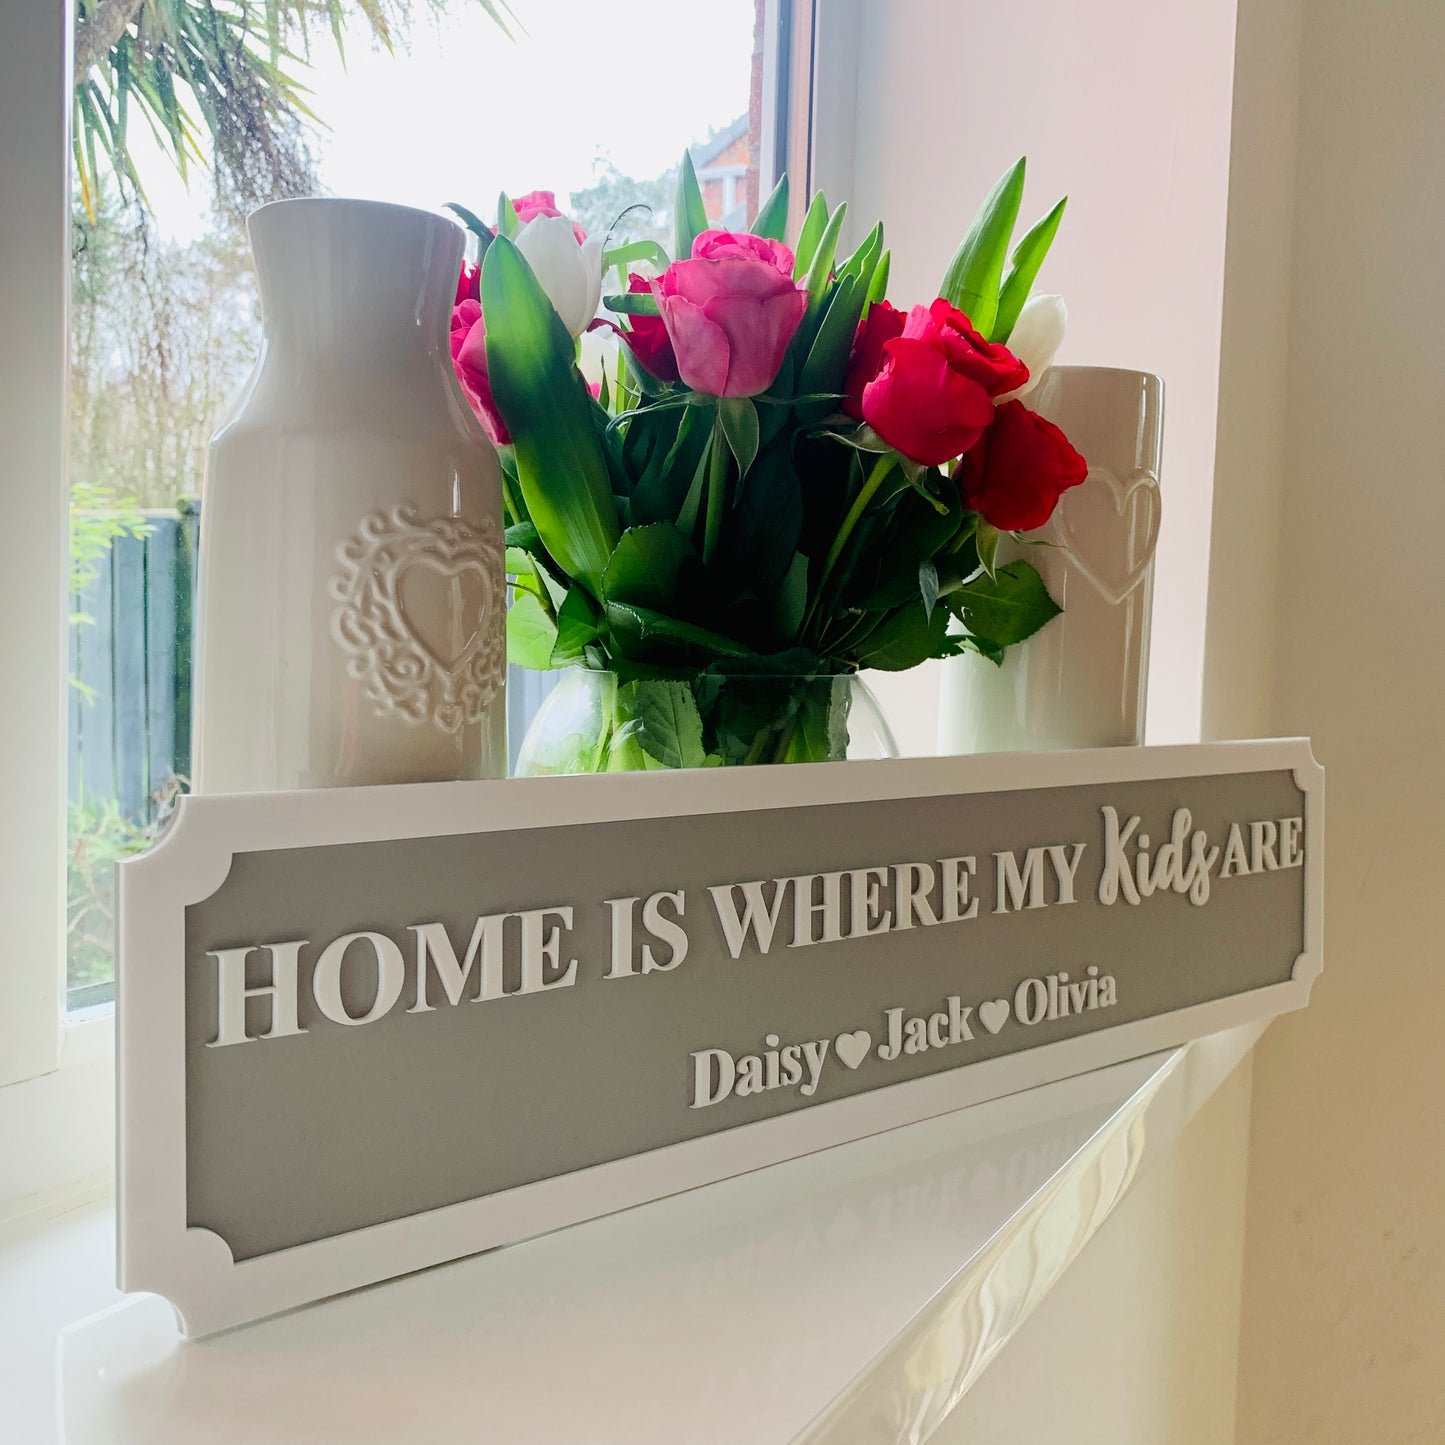 Personalised 3D Railway / Street Sign - Home Is Where My / Our Kids Are